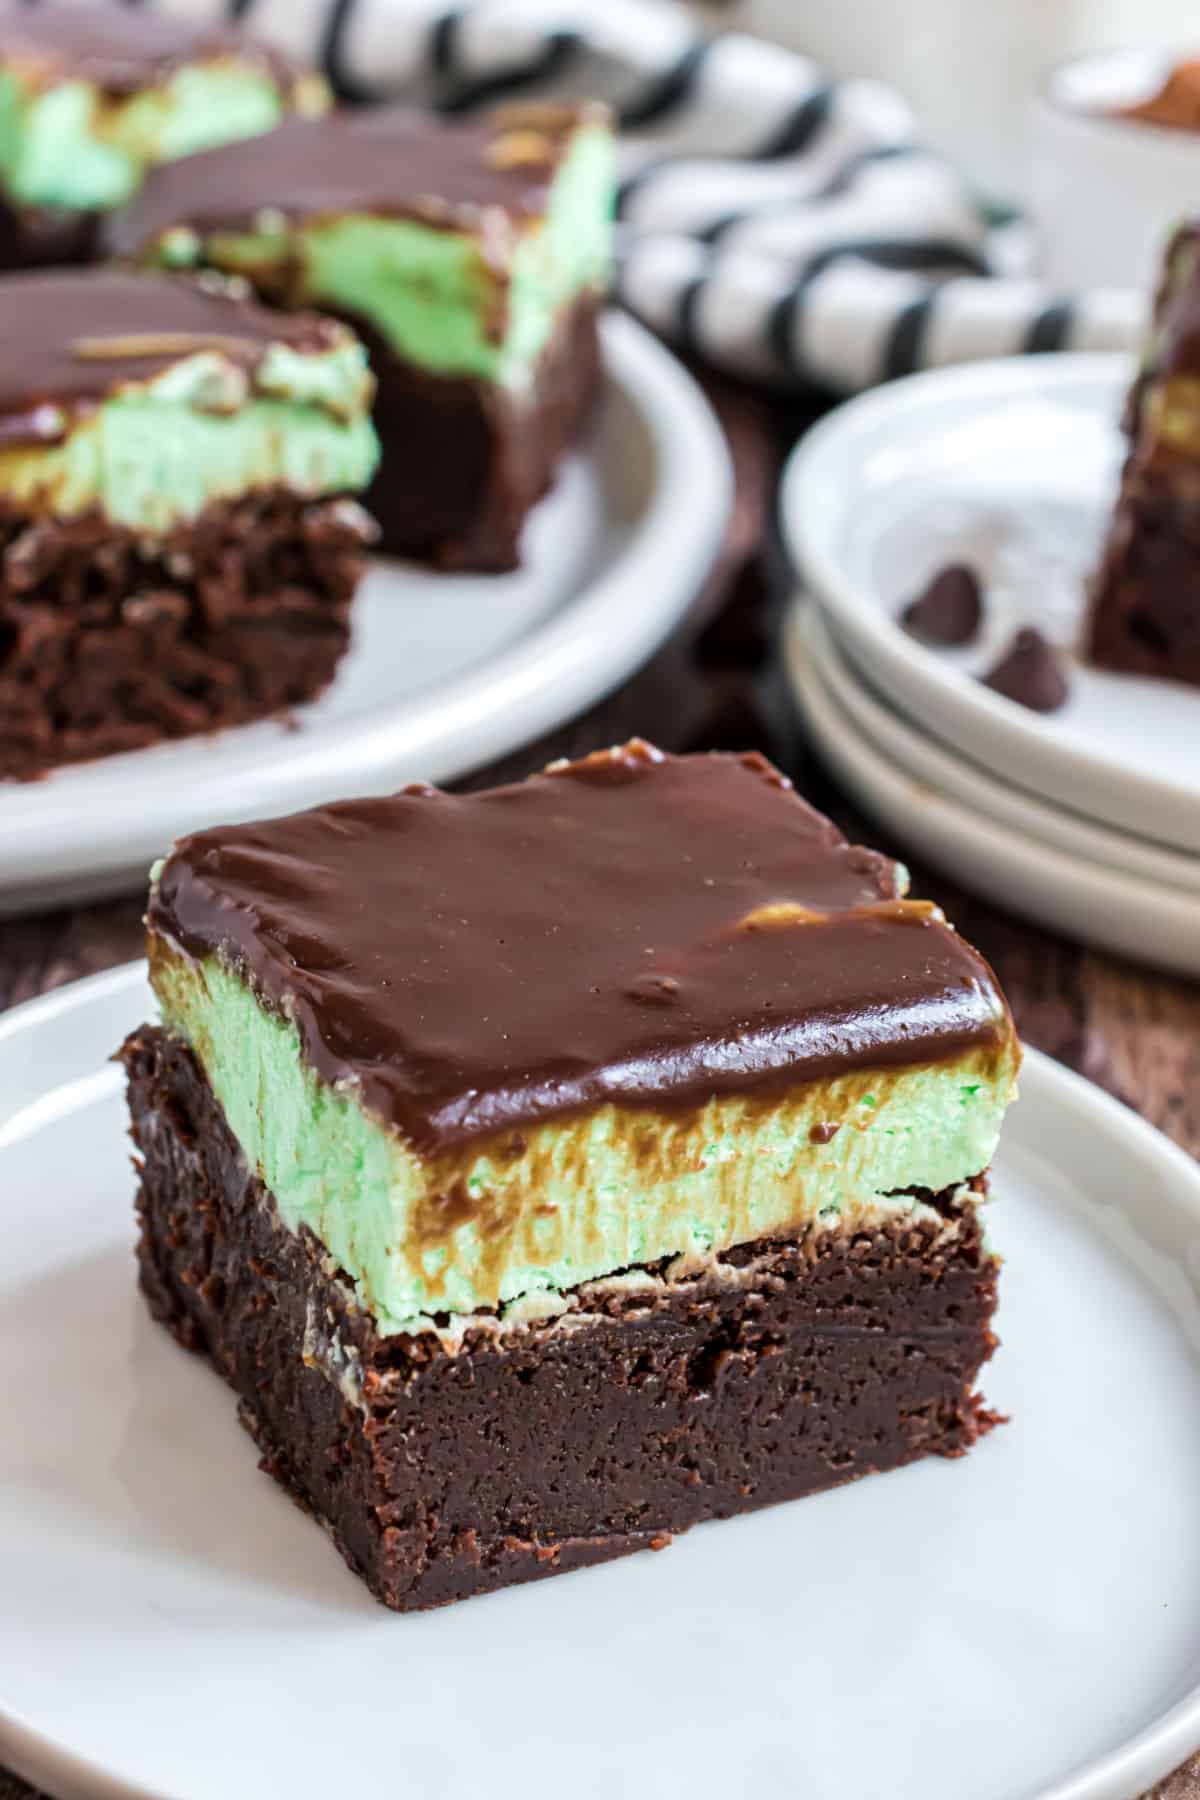 Slice of chocolate brownie on white plate, topped with mint green filling and chocolate ganache.